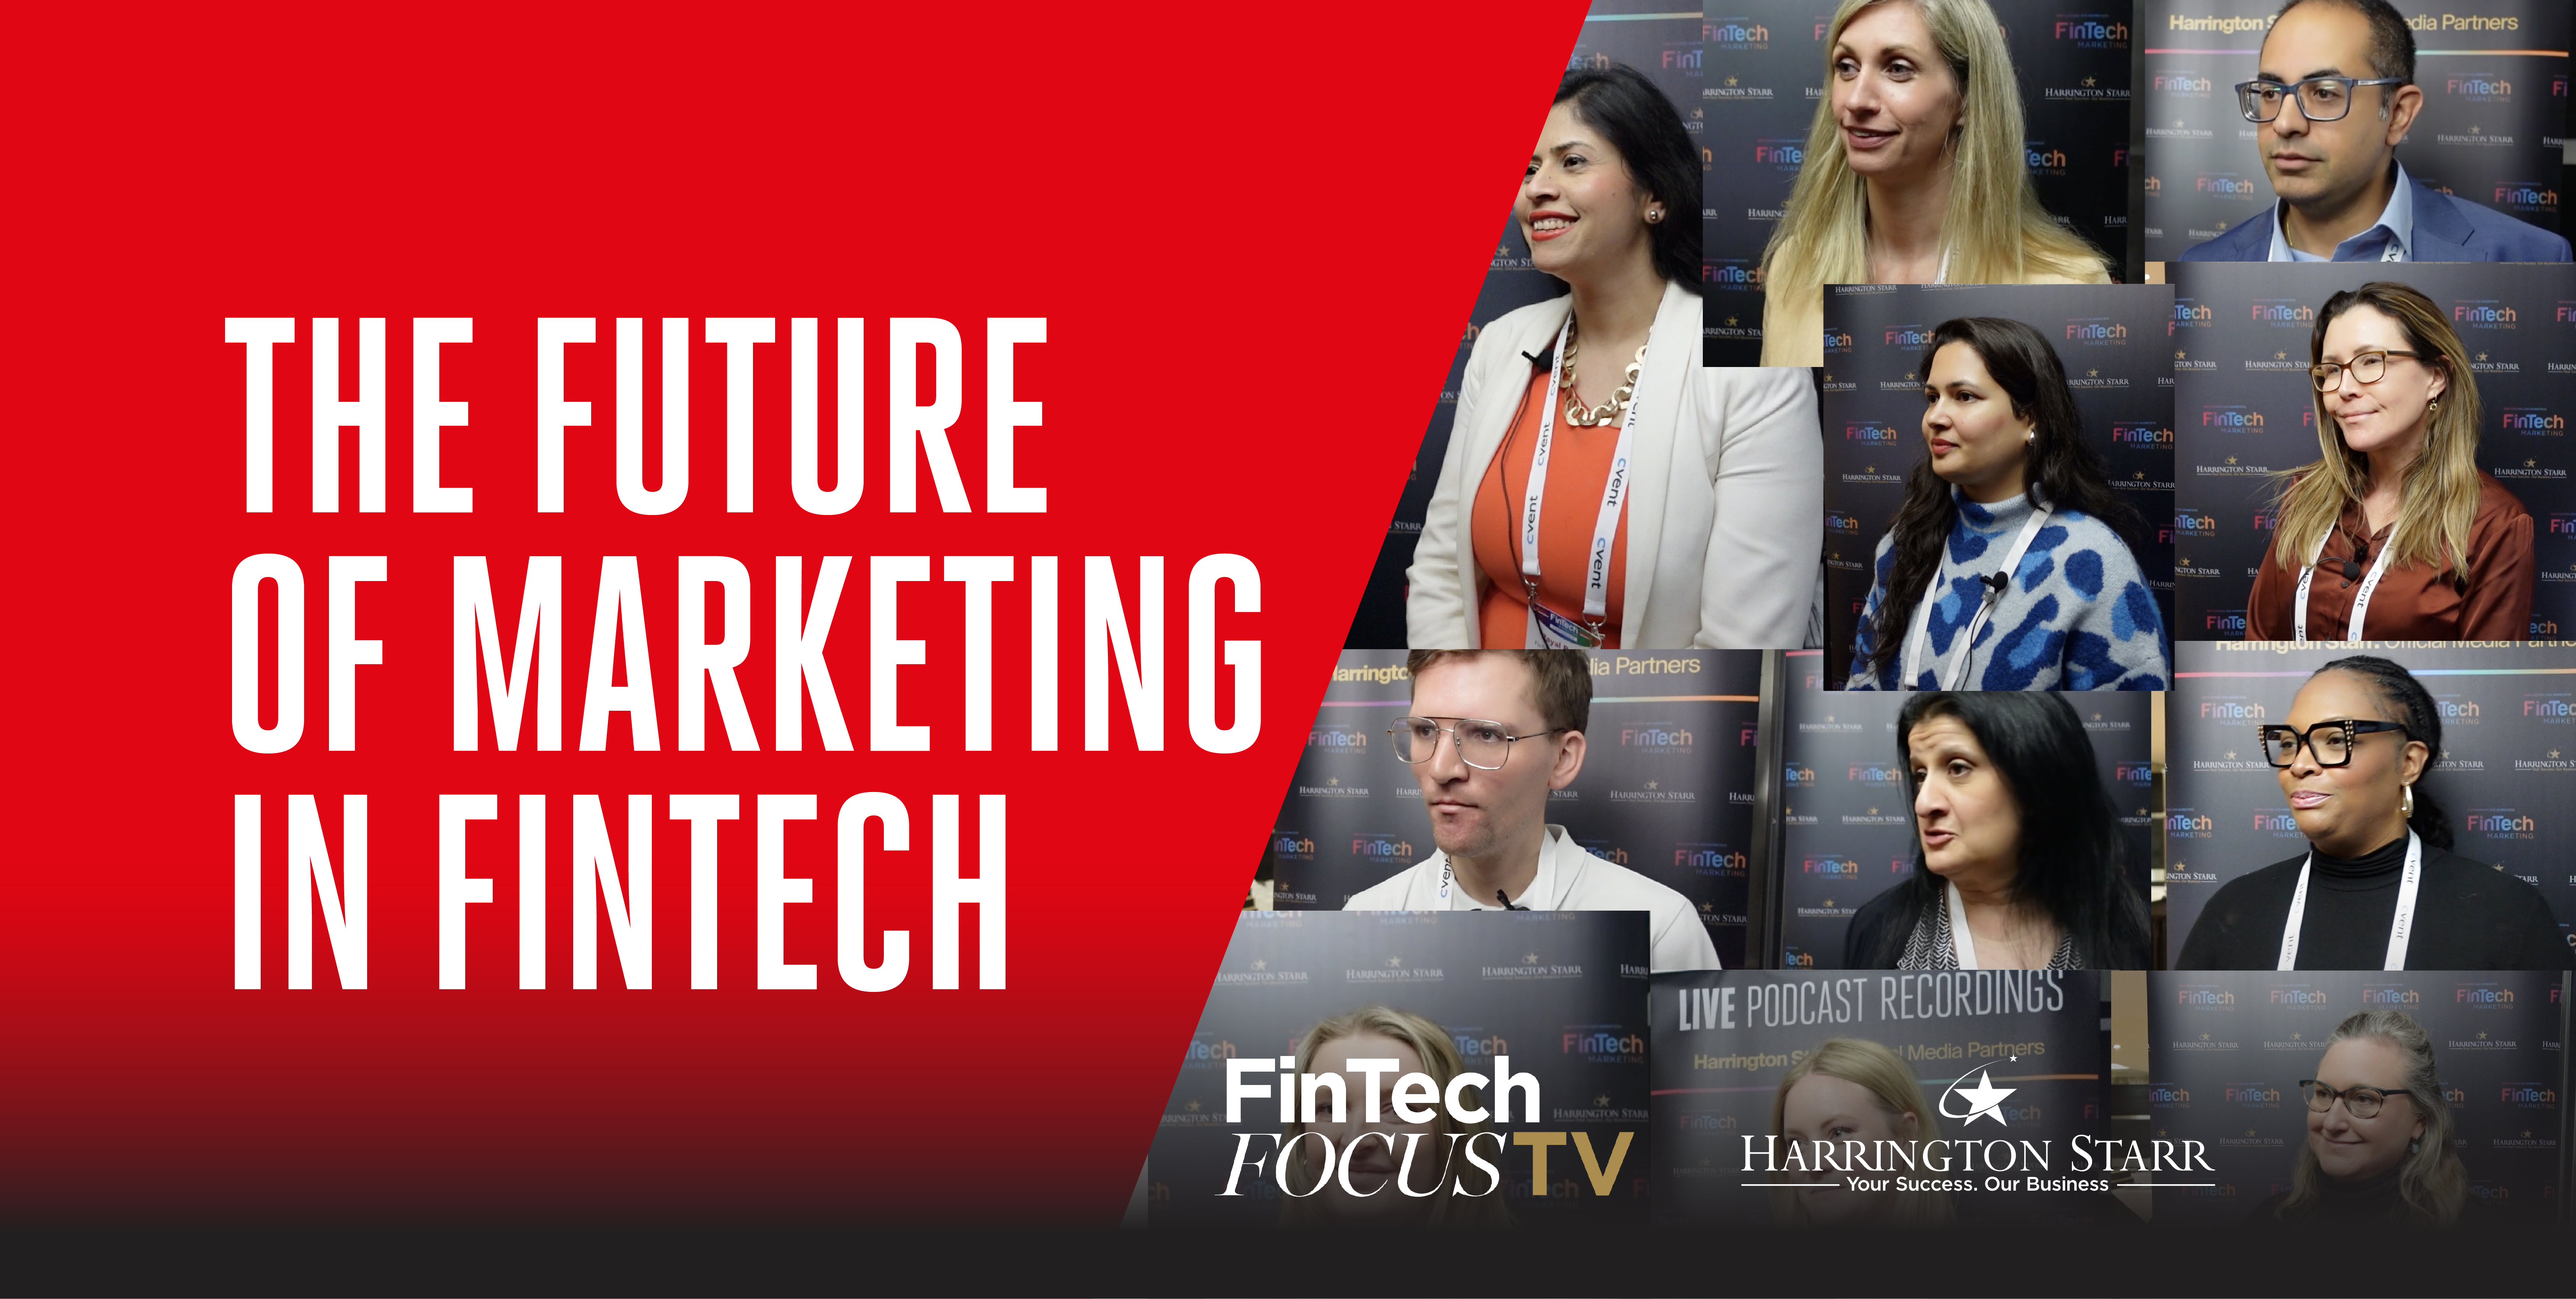 The Future of Marketing in FinTech